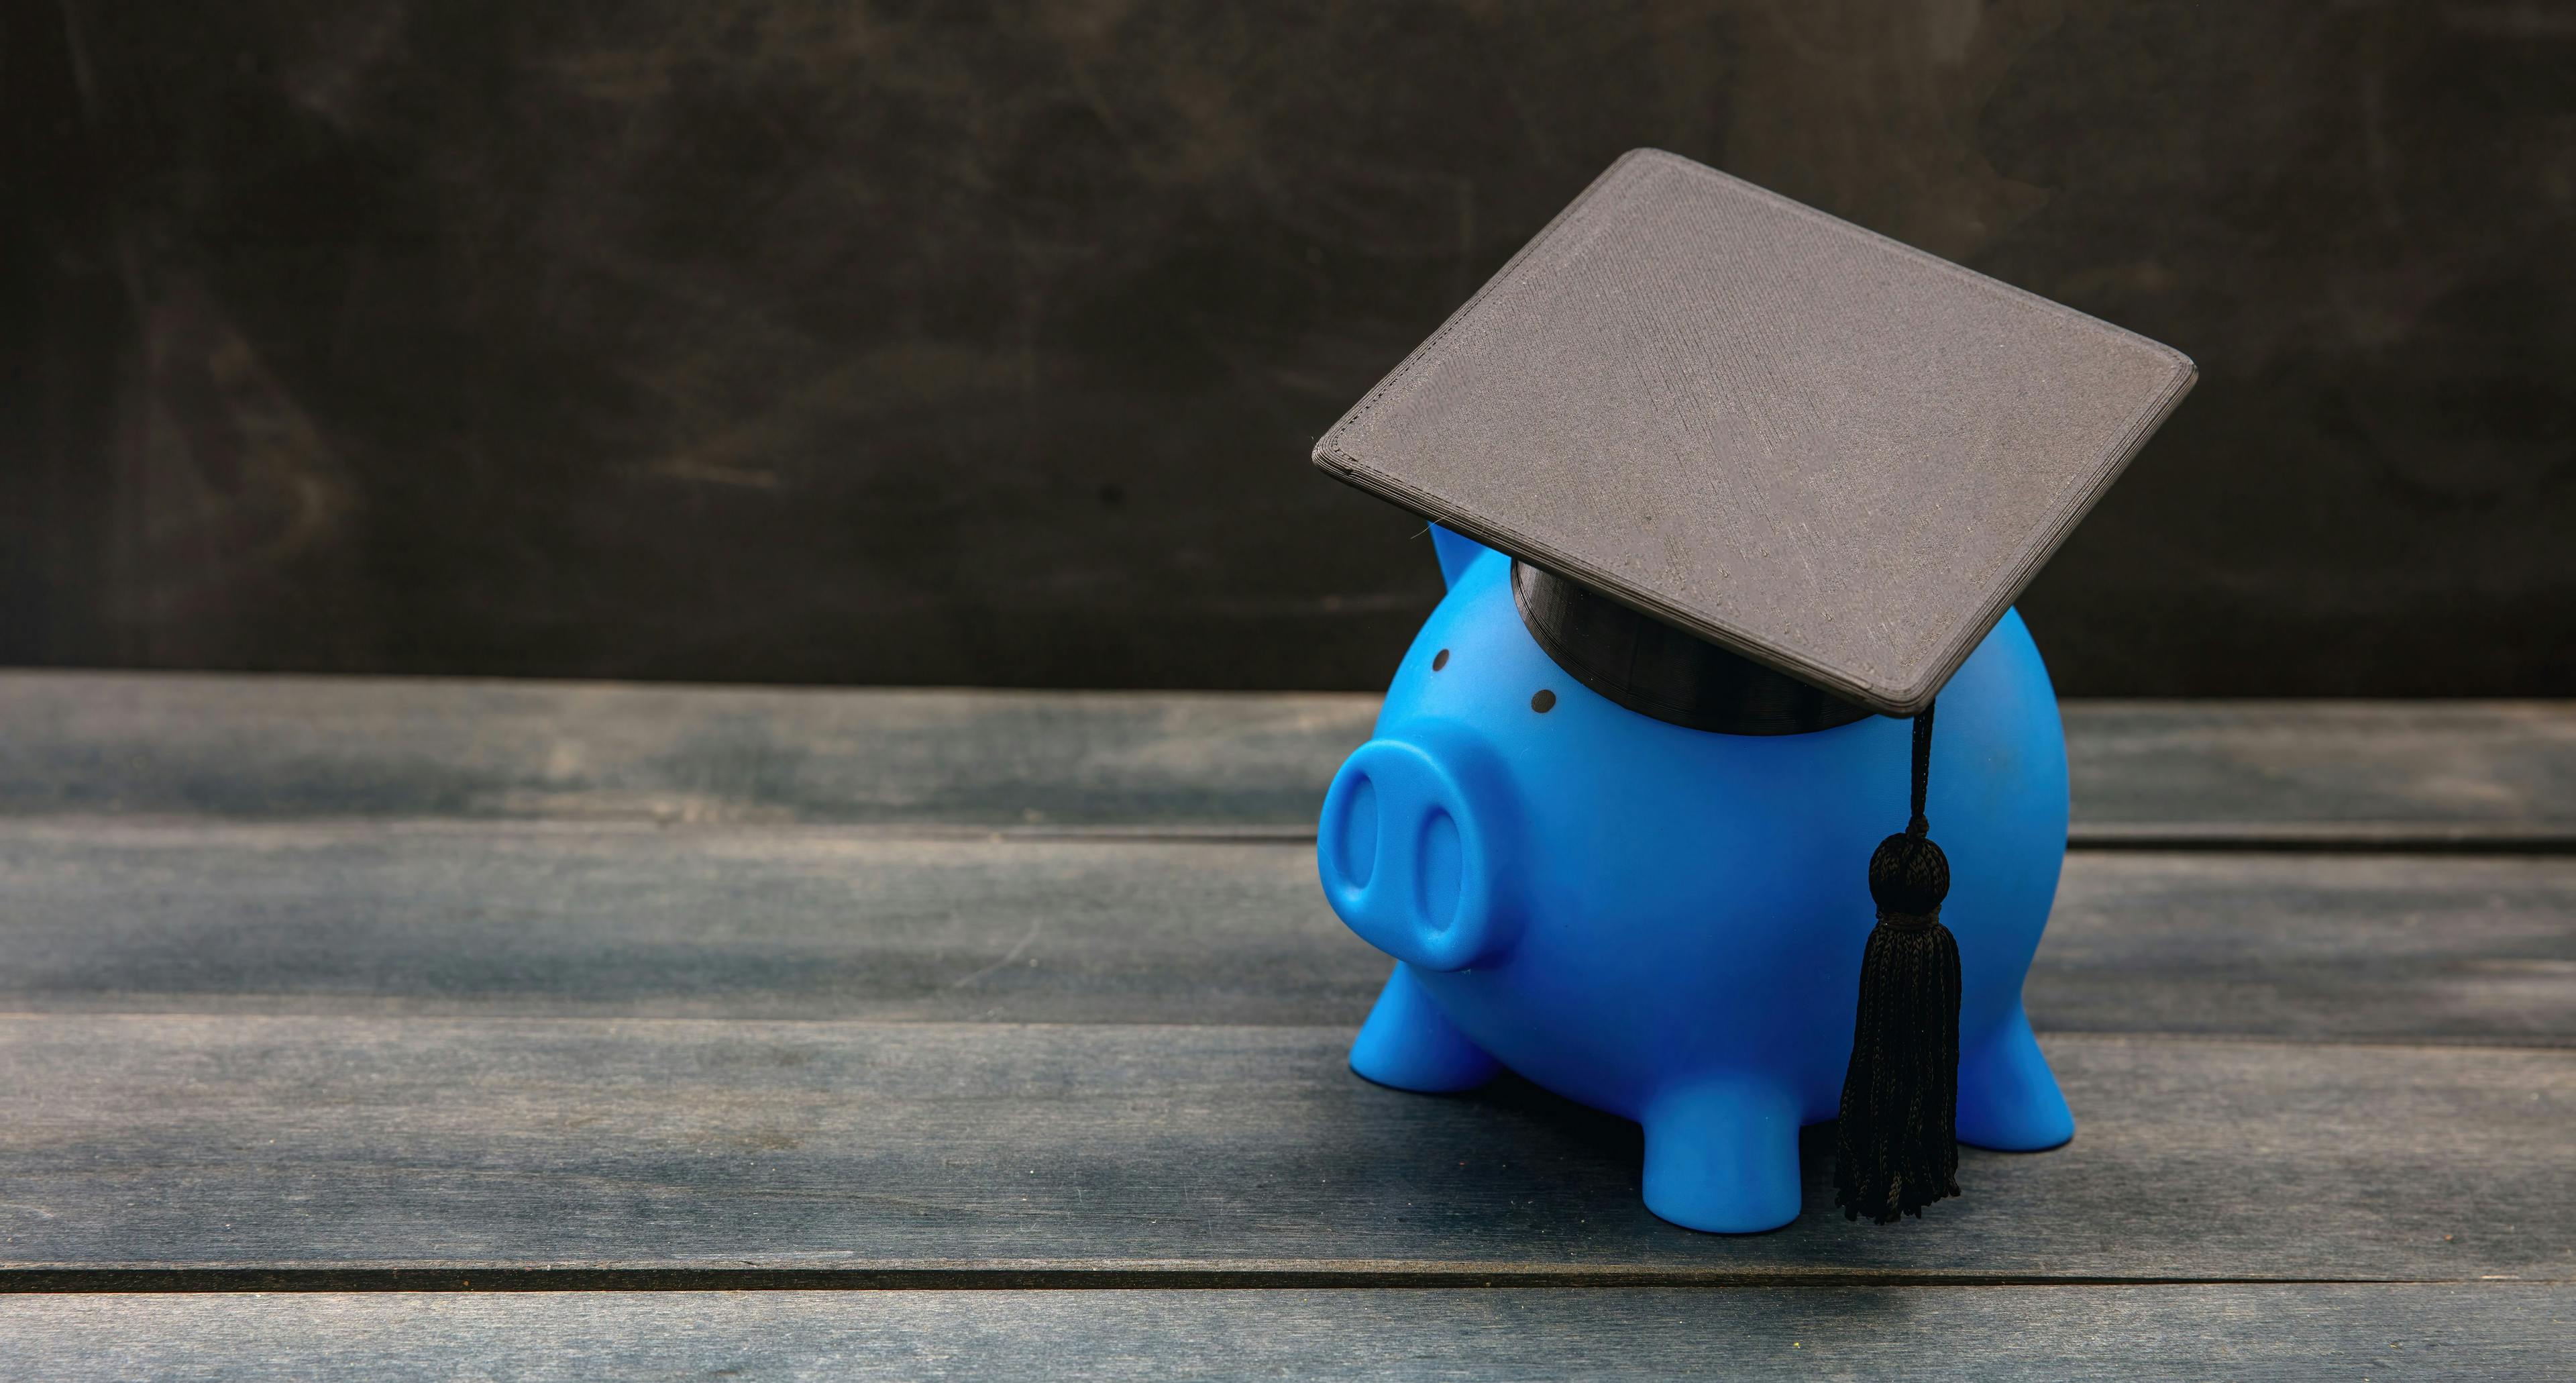 Dealing With Student Loan Debt: How to Budget for Repayment and Other Financial Goals